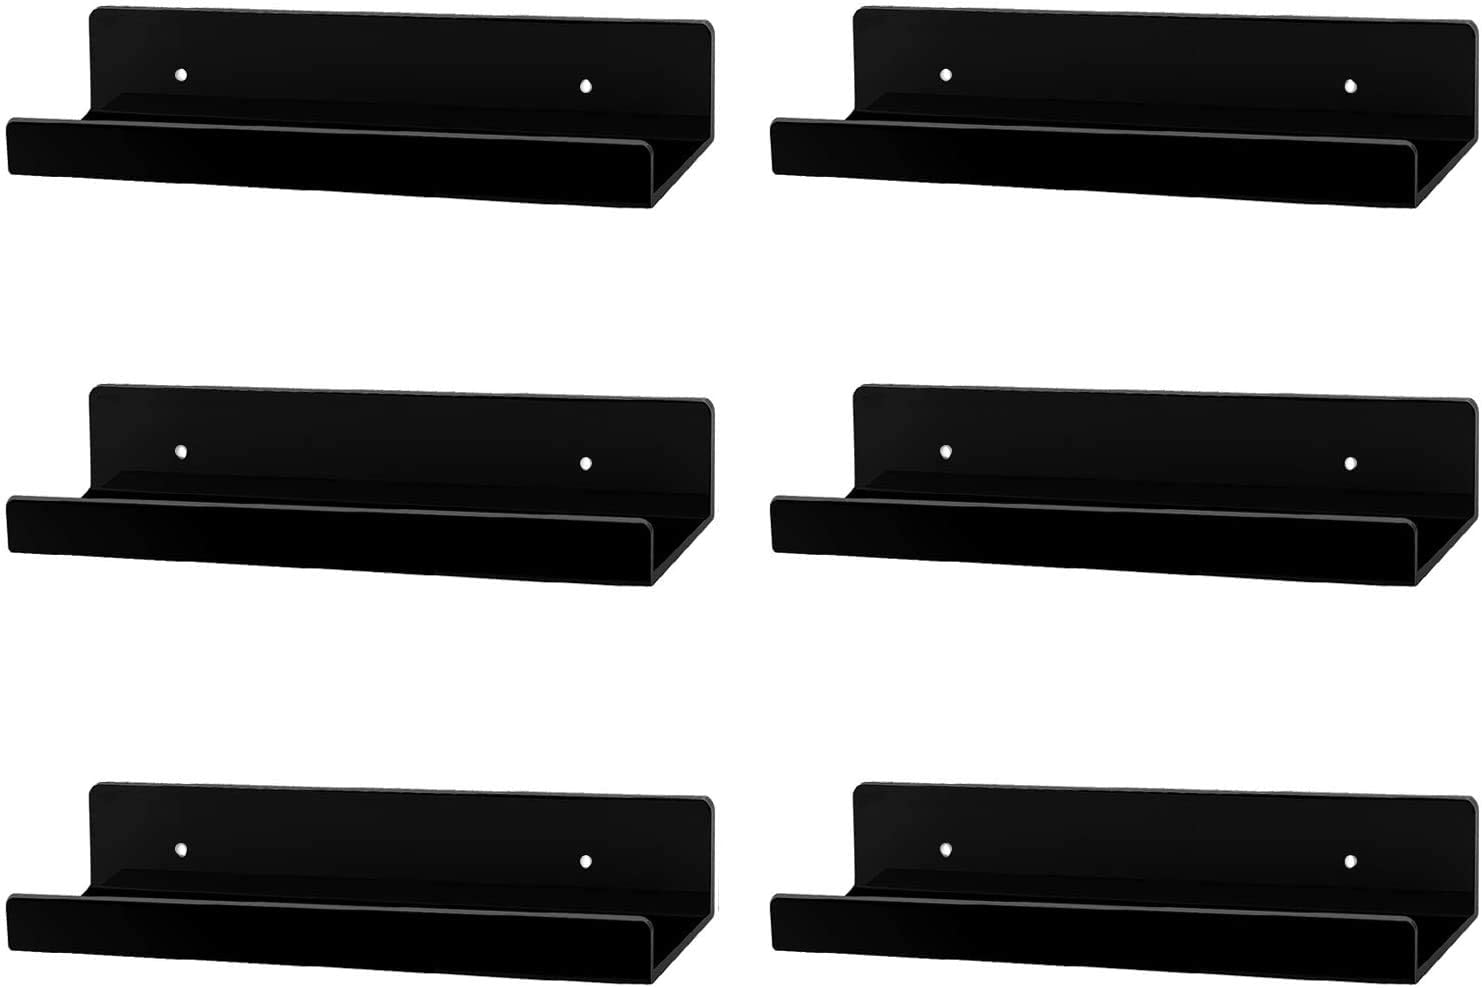 hblife 15" Acrylic Floating Wall Ledge Shelf, Wall Mounted Nursery Kids Bookshelf, Invisible Spice Rack, Clear 5MM Thick Bathroom Storage Shelves Display Organizer, 15" L x 4" D x 2" H